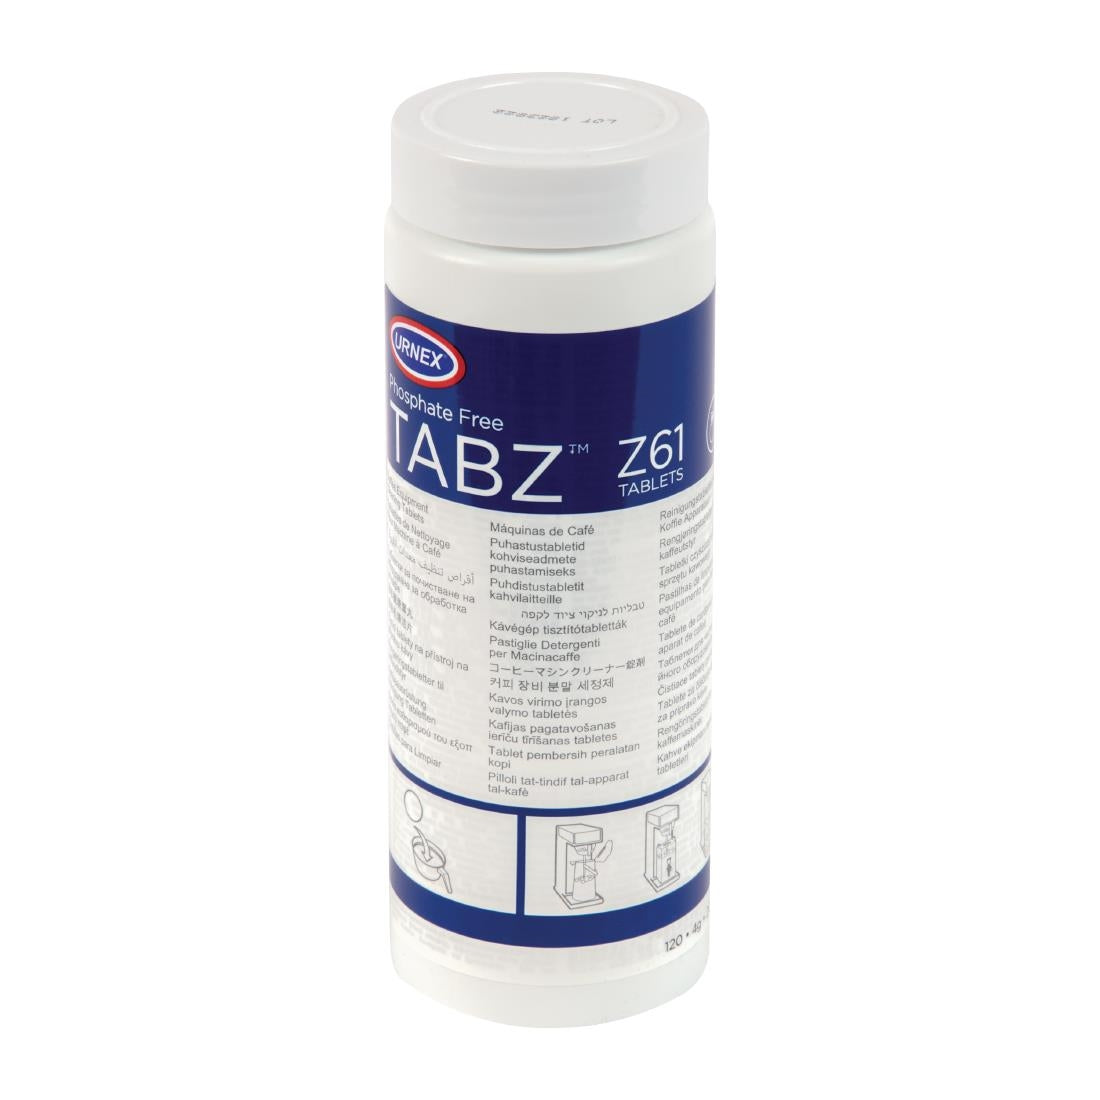 CX510 Urnex Tabz Coffee Equipment Cleaner Tablets 4g (Pack of 120) JD Catering Equipment Solutions Ltd